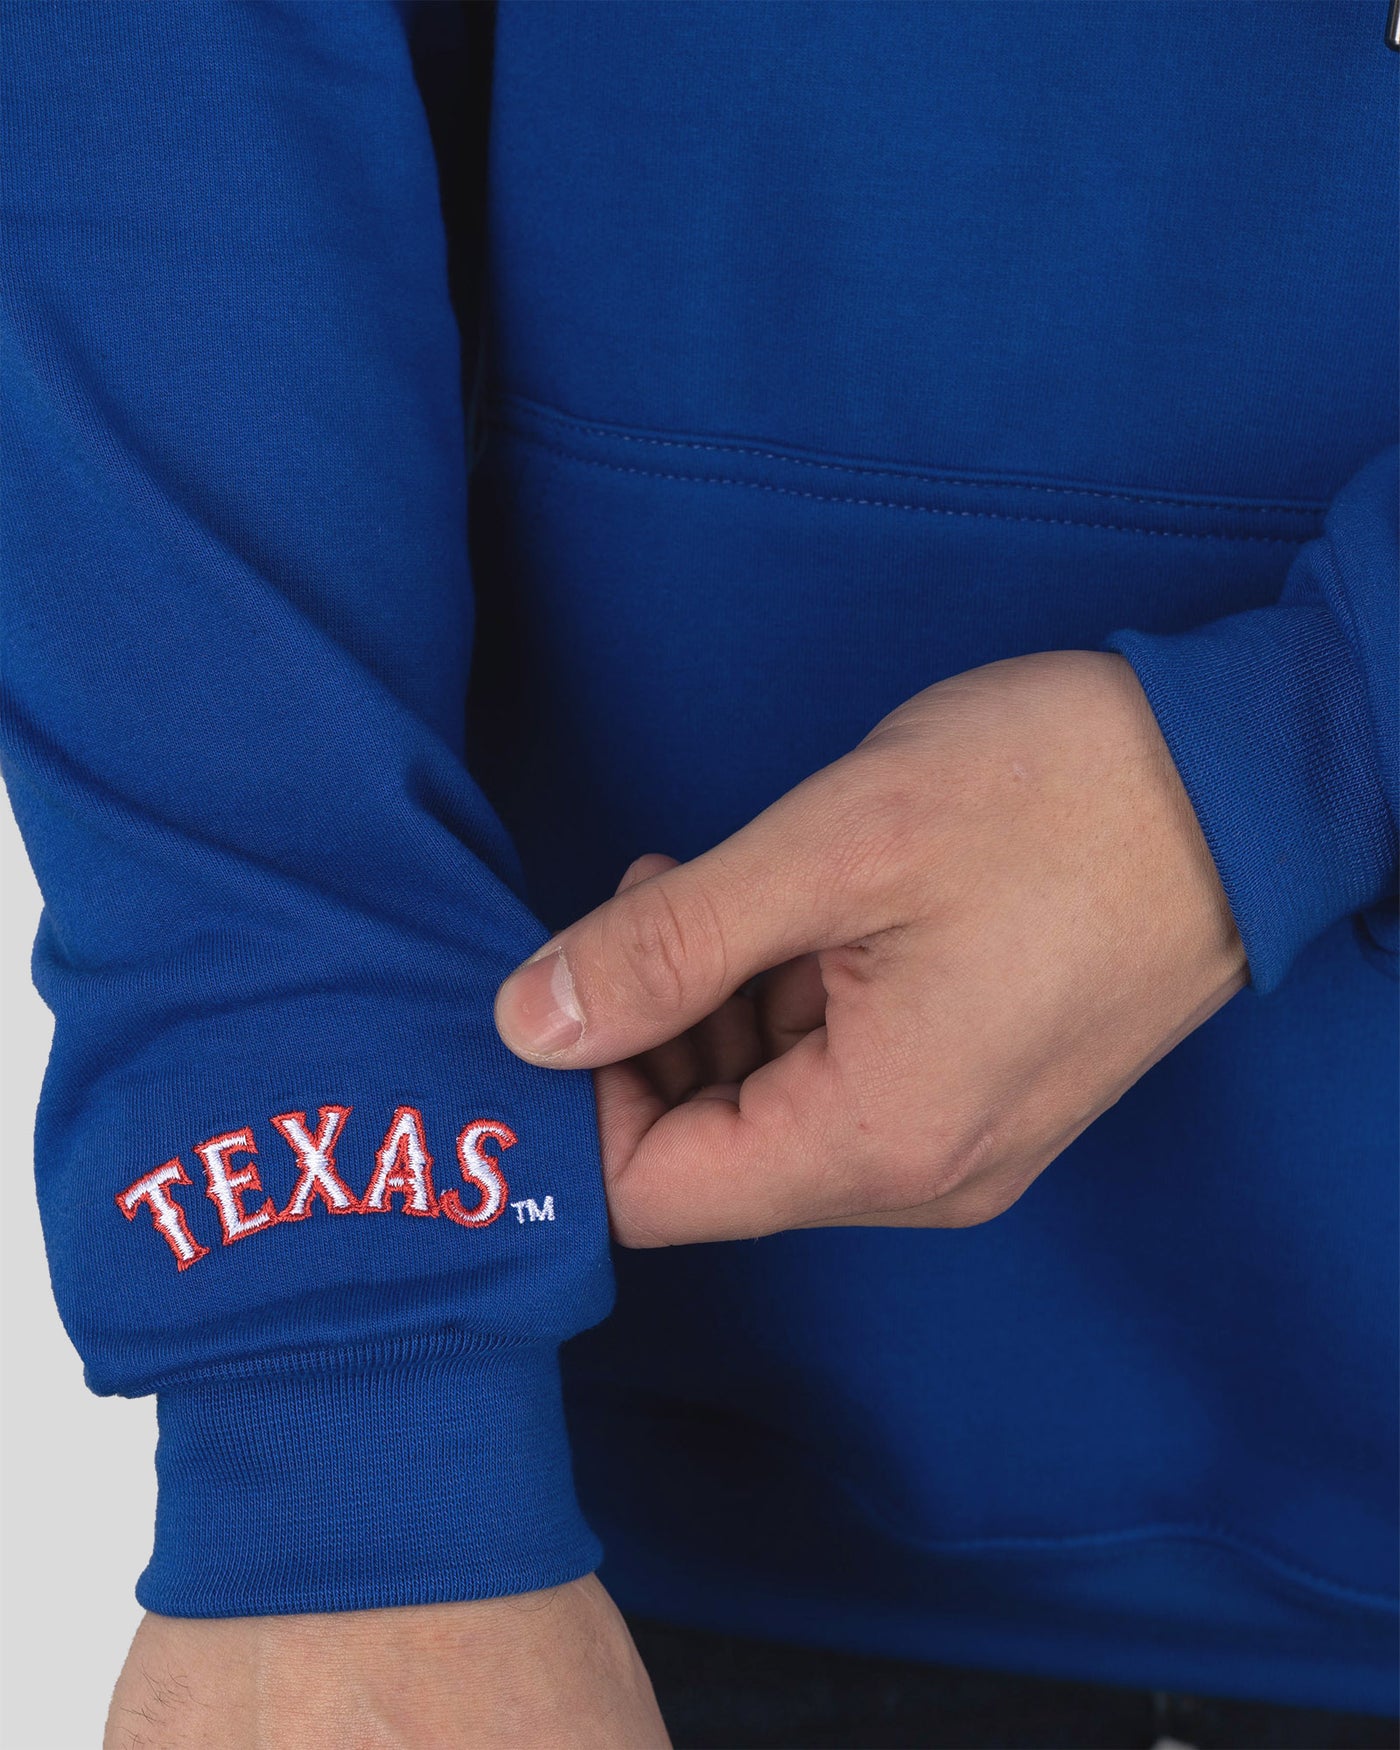 Outfield Fence Hoodie - Texas Rangers